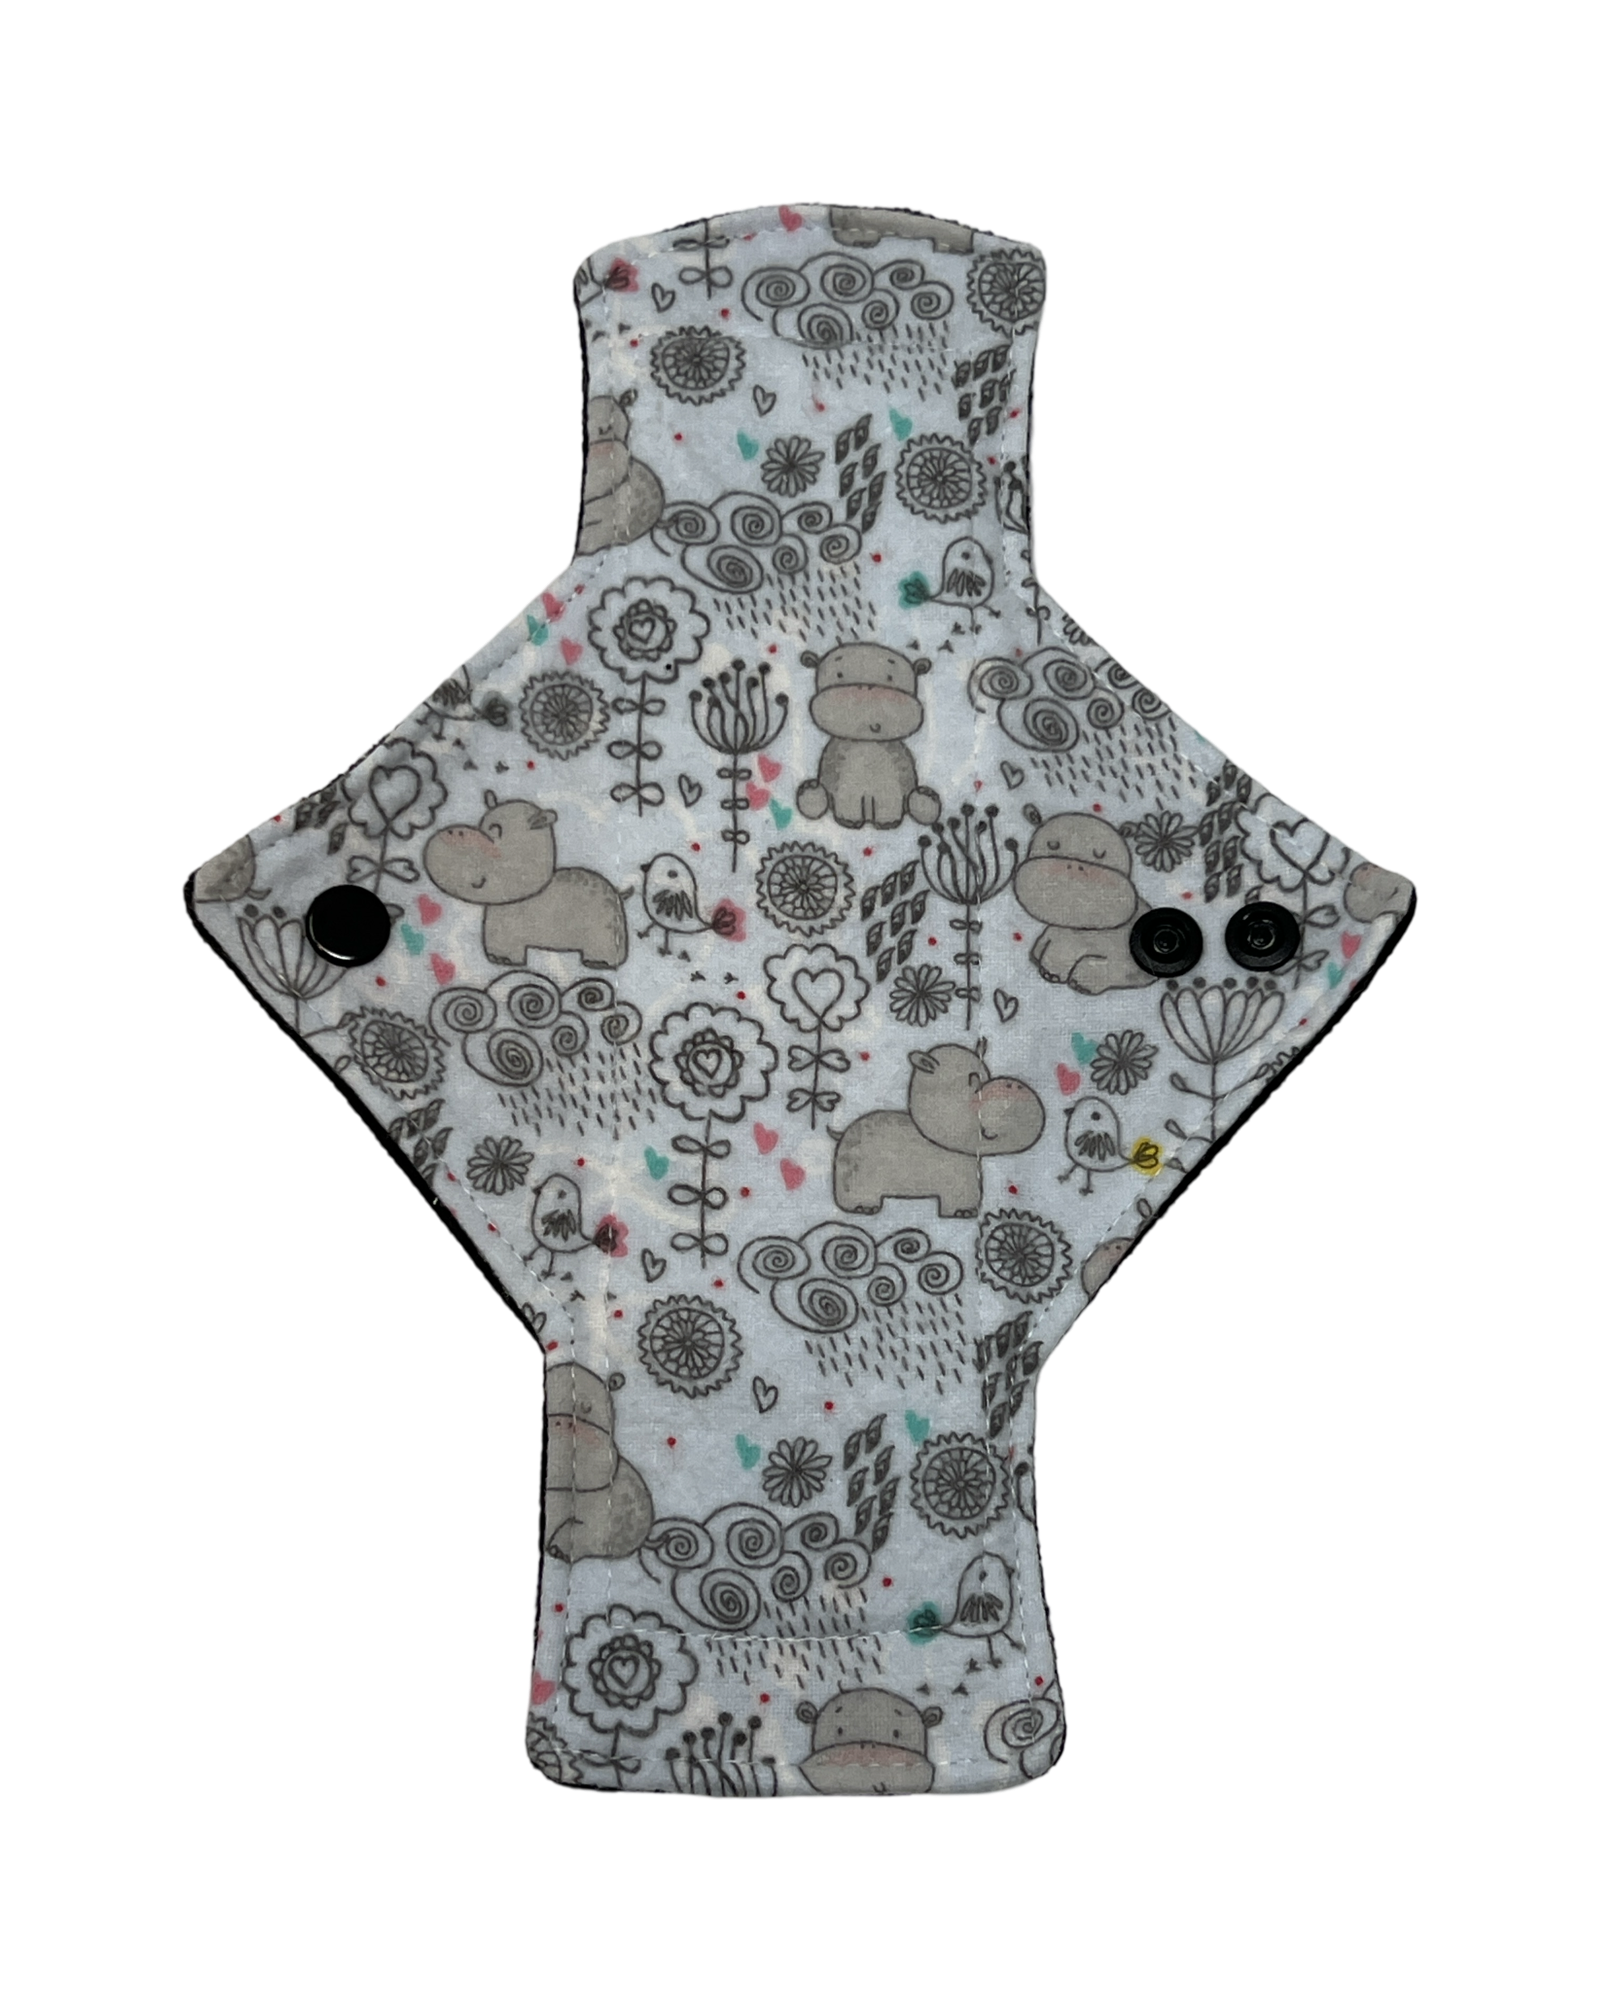 Stash Dash Event 2023 - Backed with Softshell Fleece Grey Hippos Limited Edition Cotton Single Heavy Flow Day Pad - Tree Hugger Cloth Pads